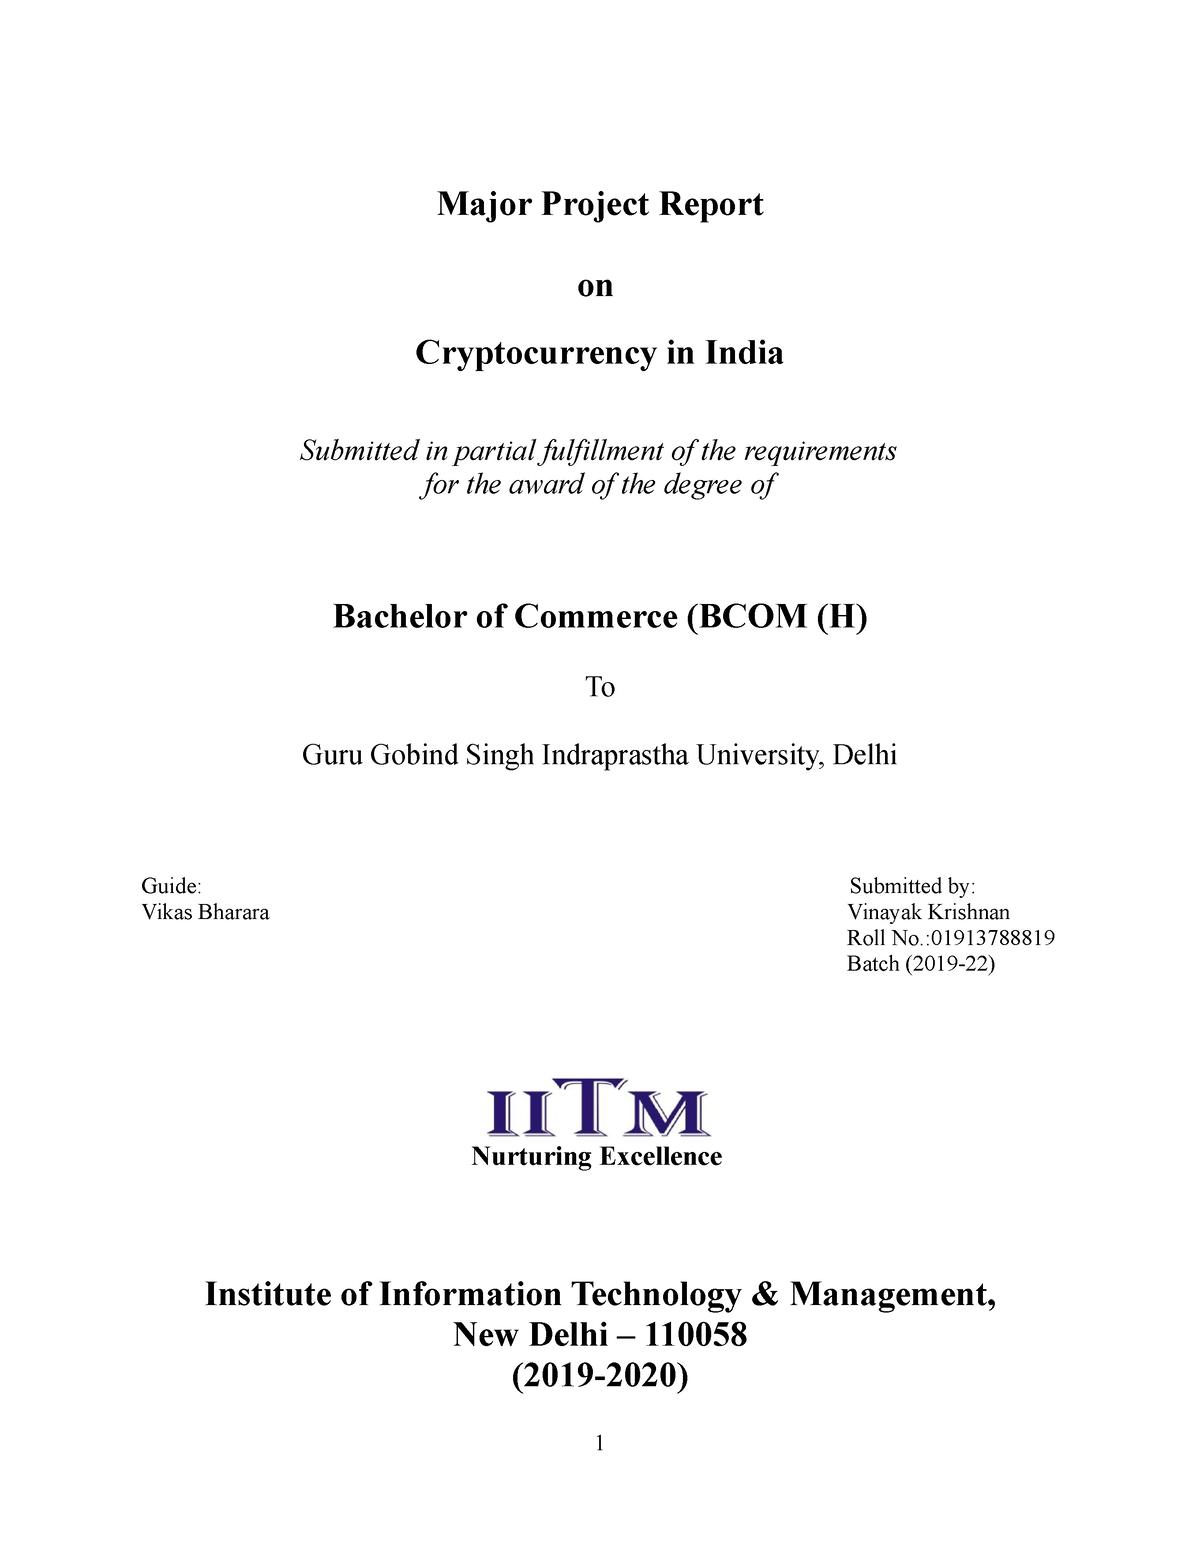 research papers on cryptocurrency in india